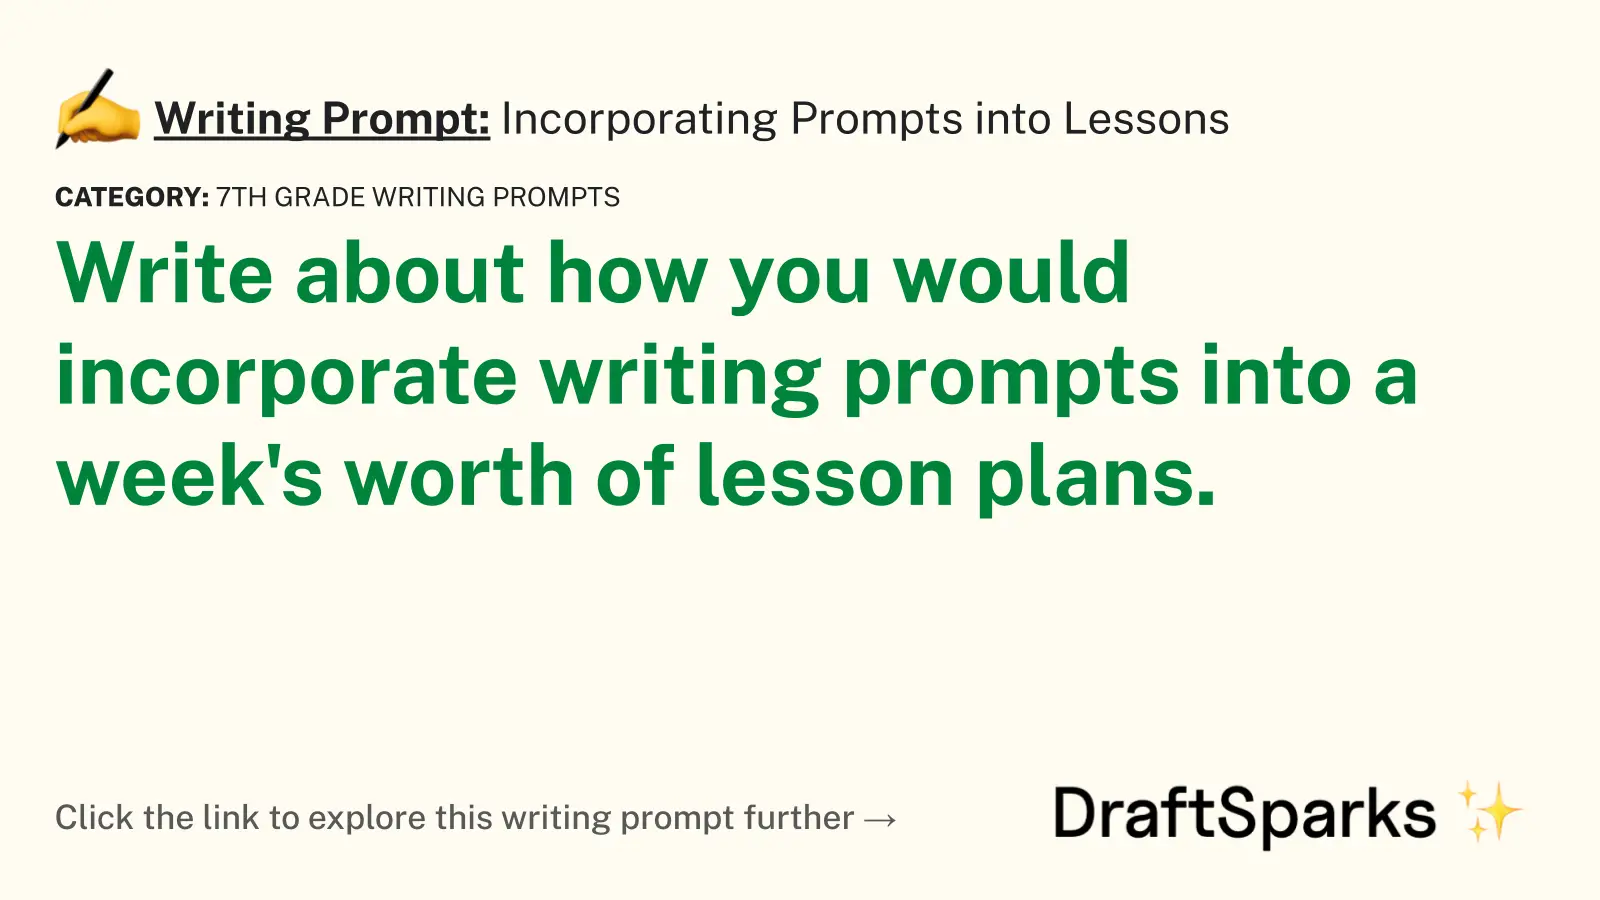 Incorporating Prompts into Lessons